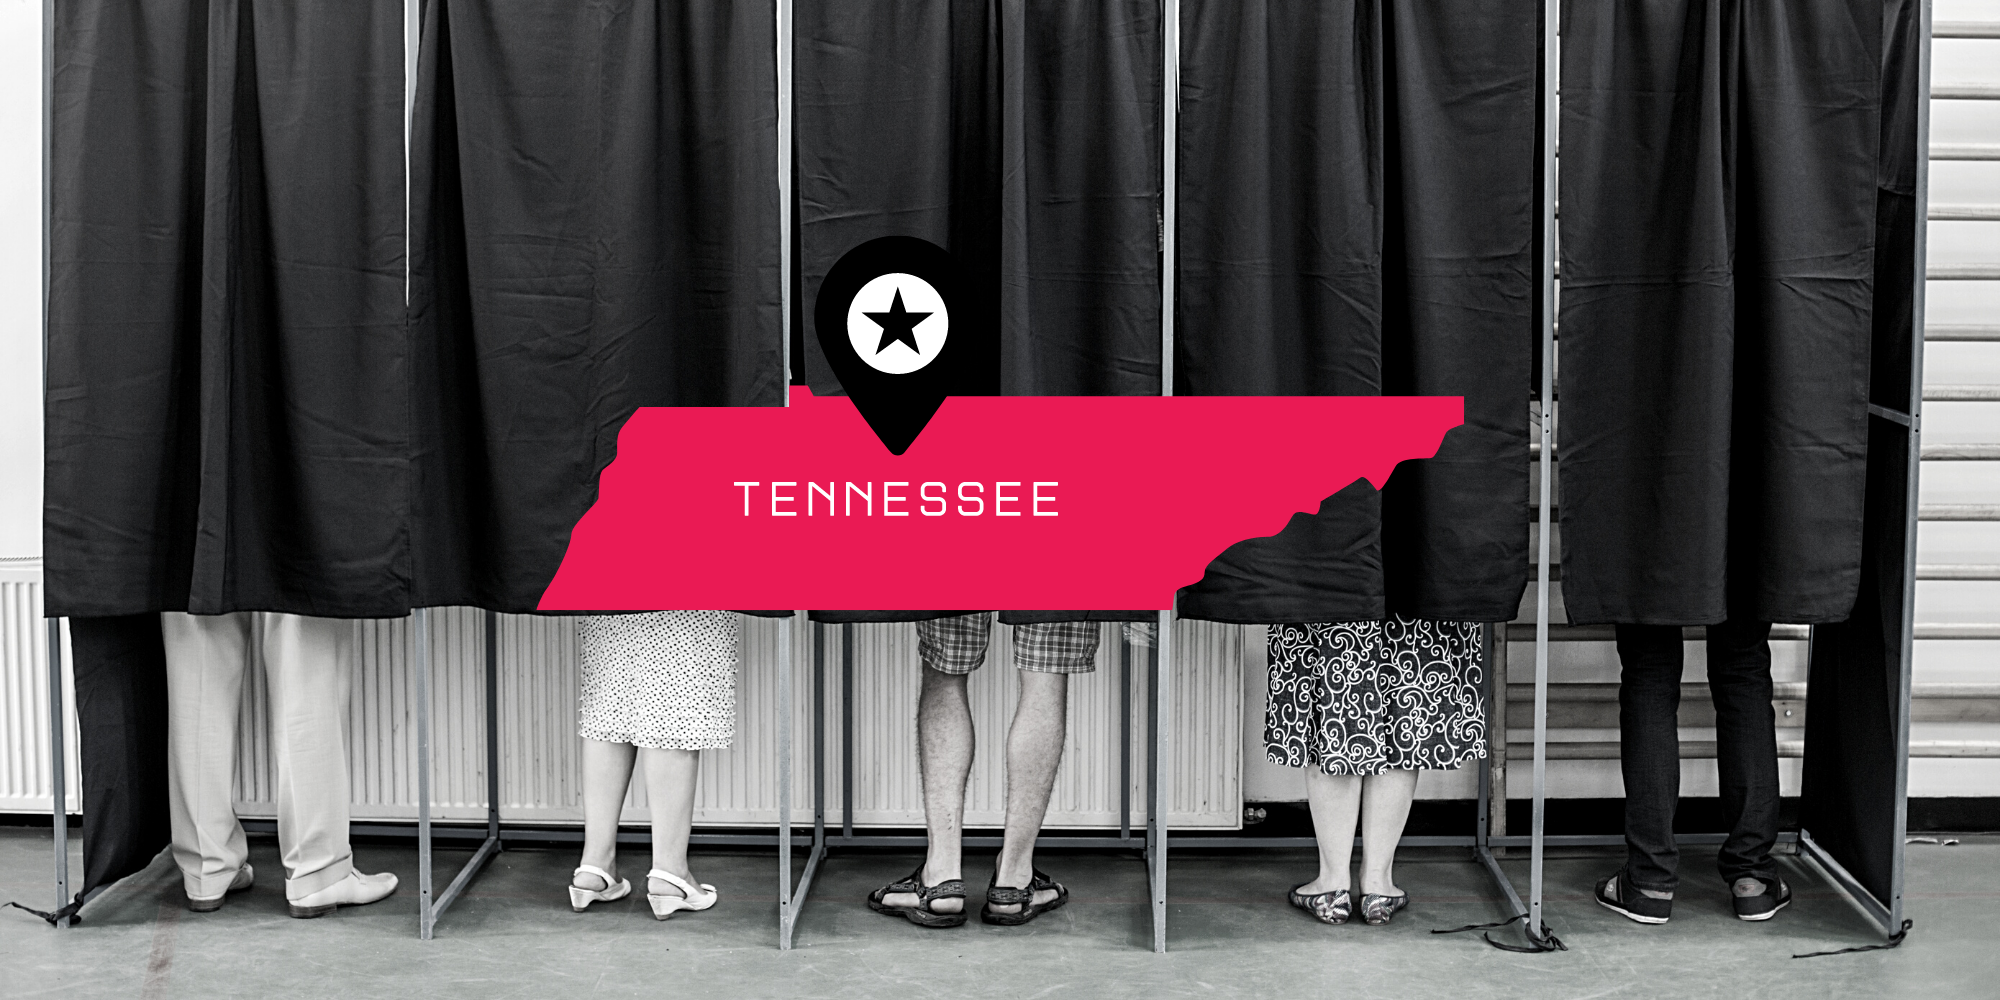 Why is it so hard to vote in Tennessee?